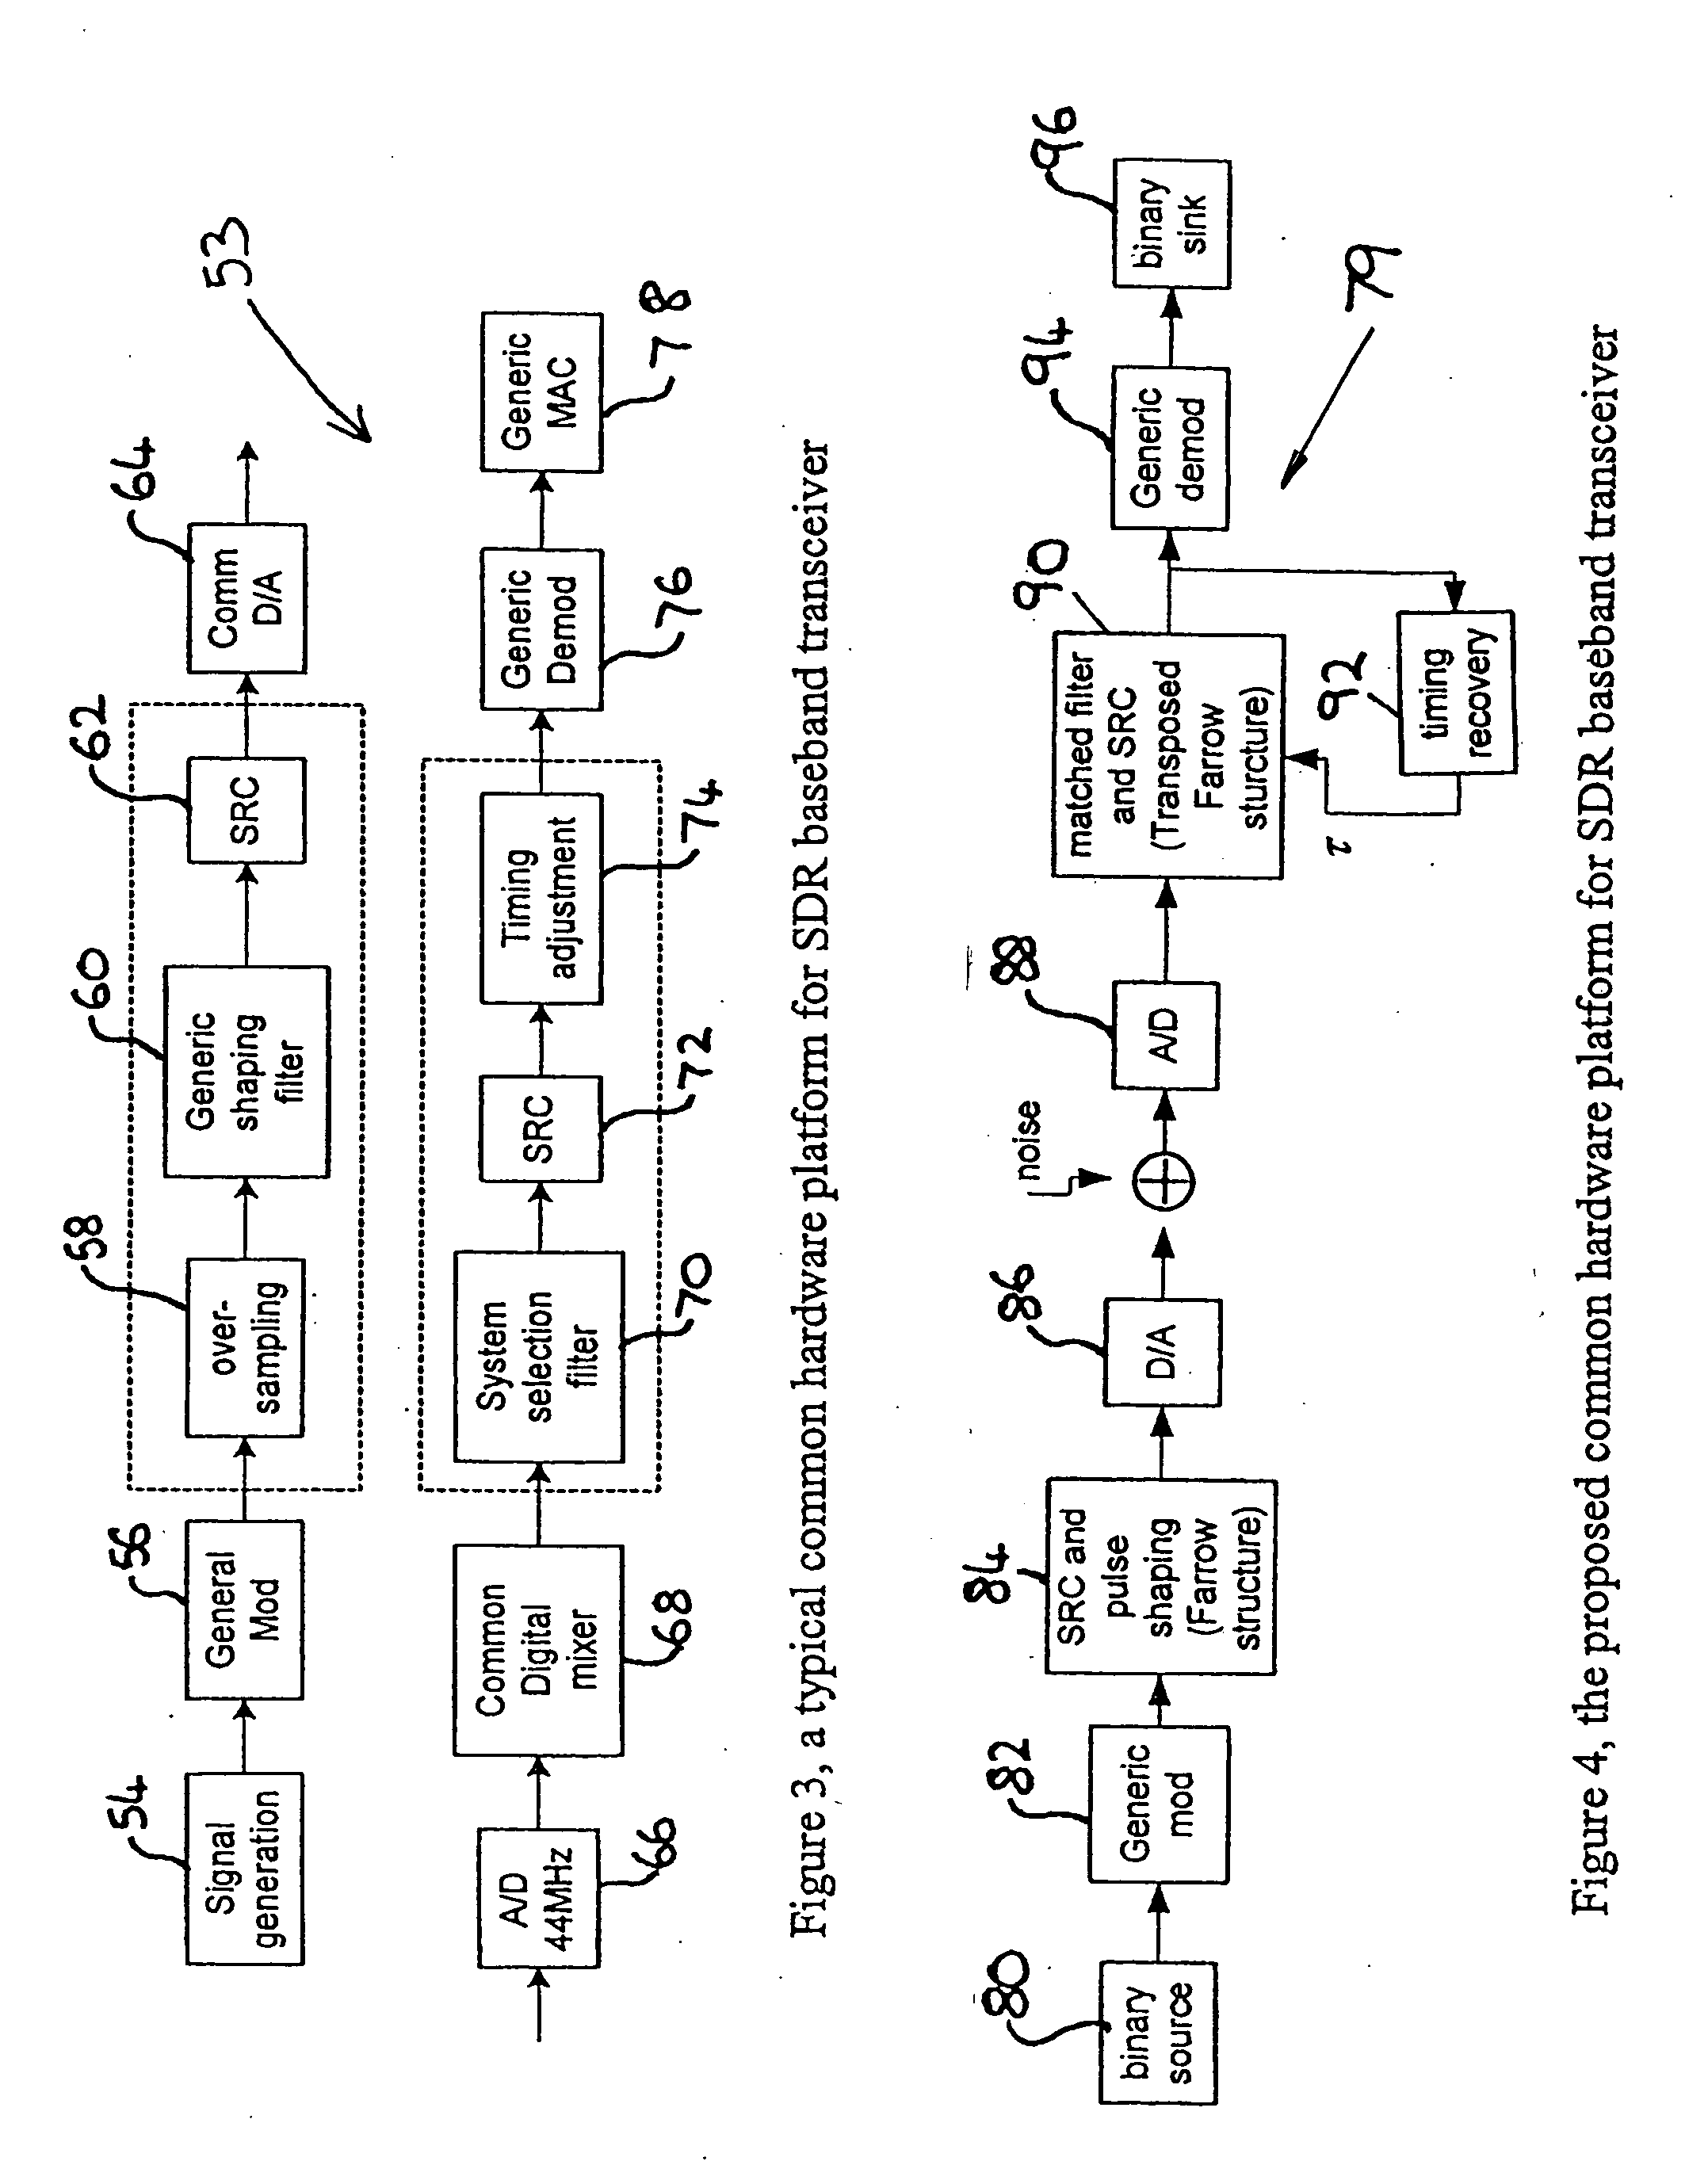 Methods for processing a received signal in a software defined radio (SDR) system, a transceiver for an SDR system and a receiver for an SDR system